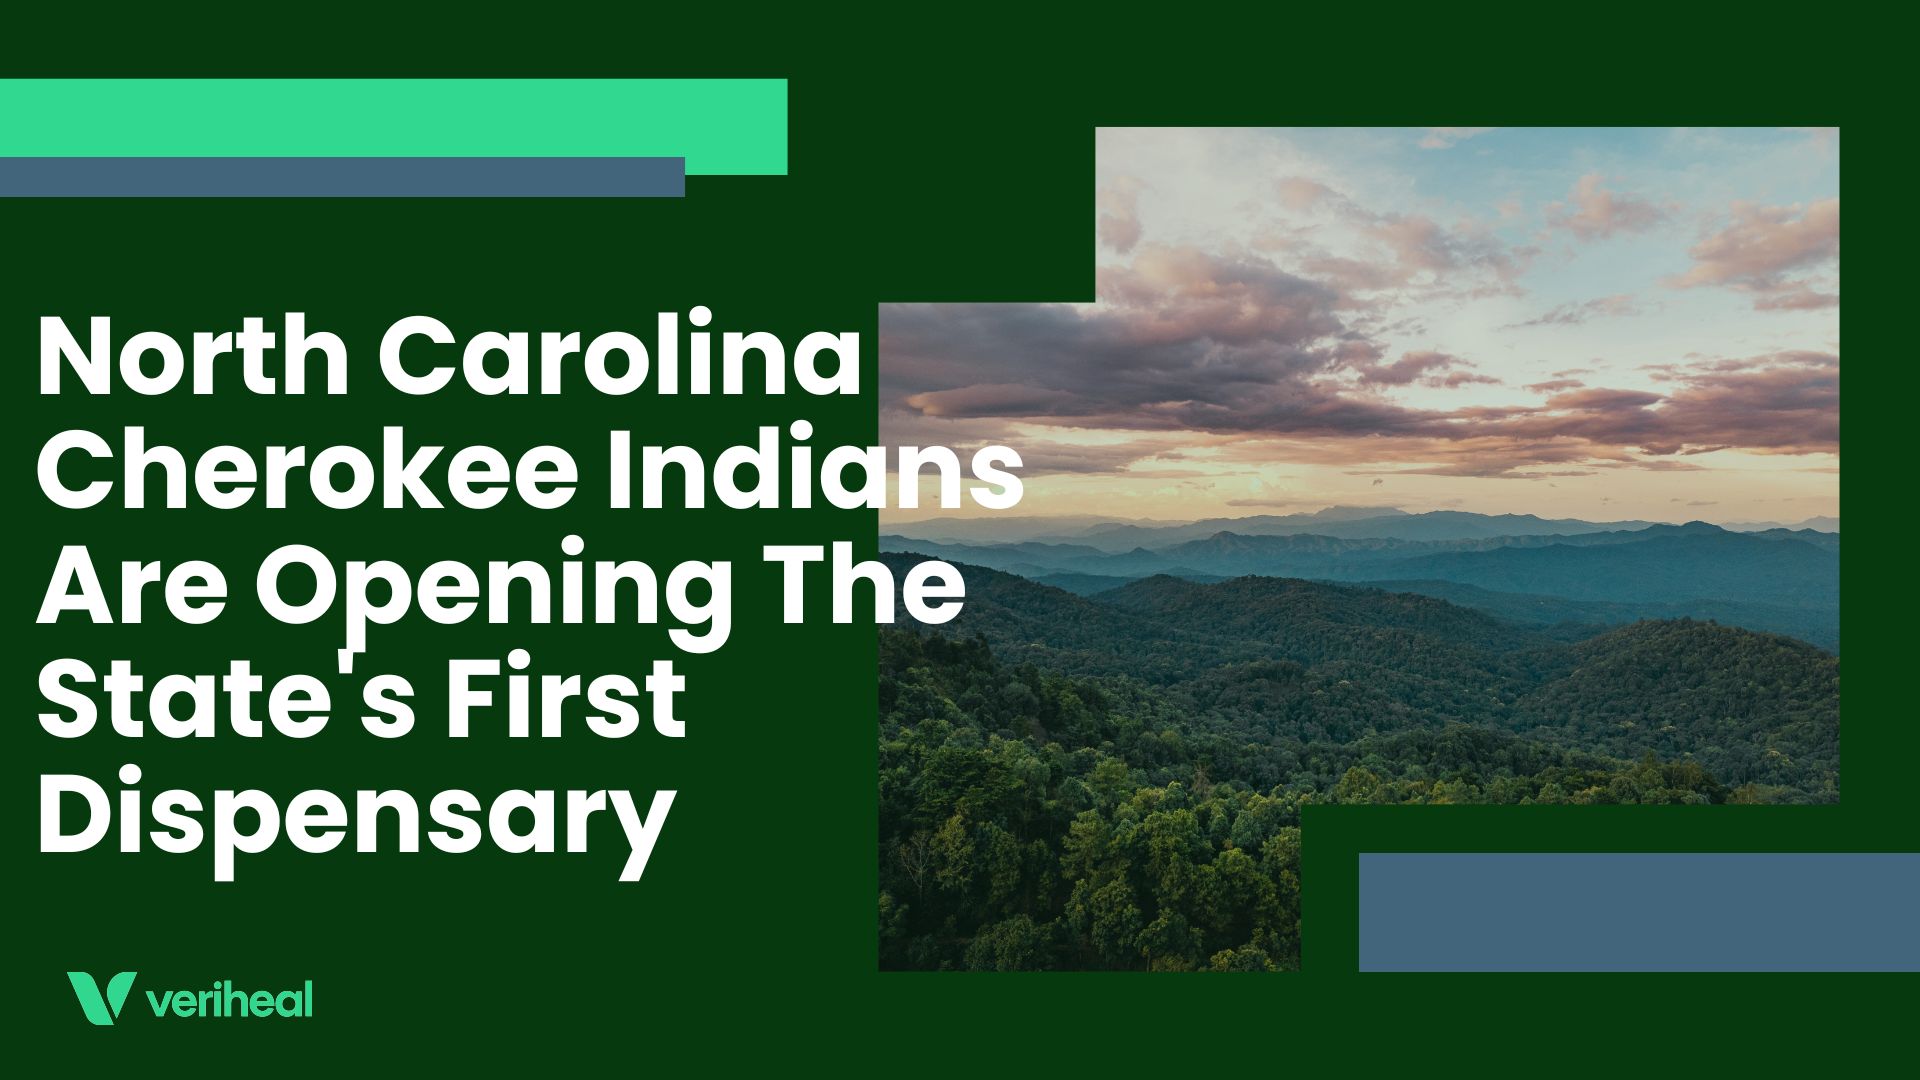 North Carolina Cherokee Indians Are Opening The State’s First Dispensary